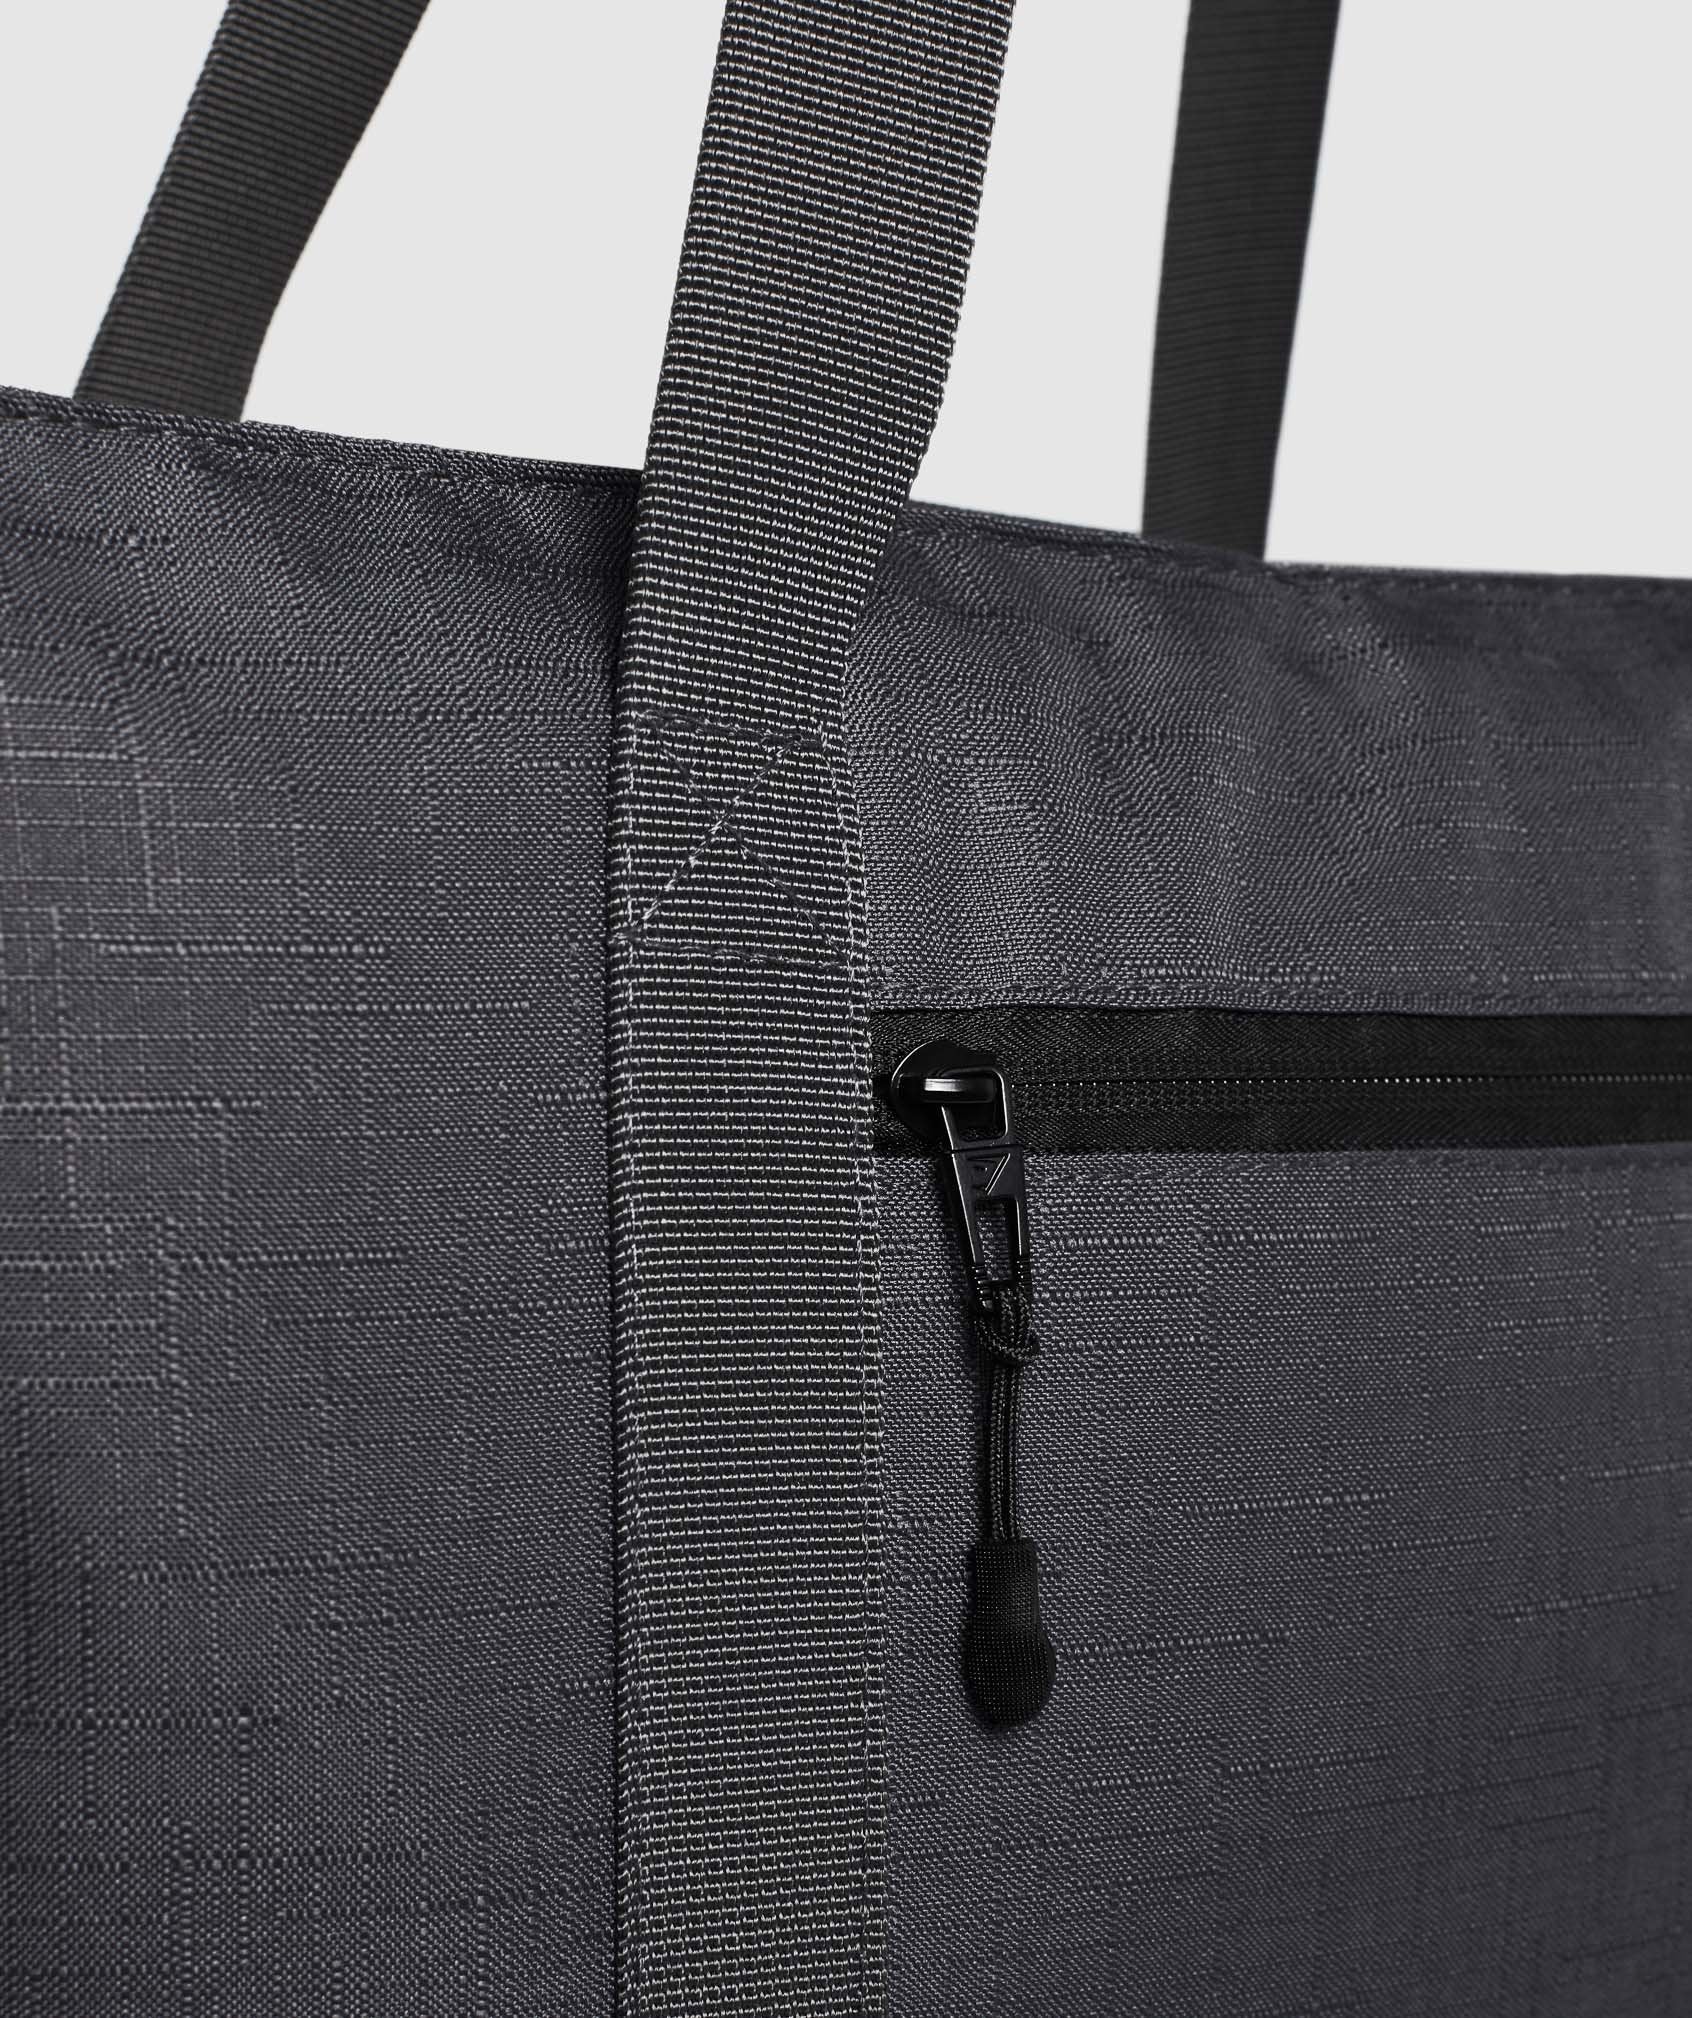 Tote Bag in Charcoal - view 5